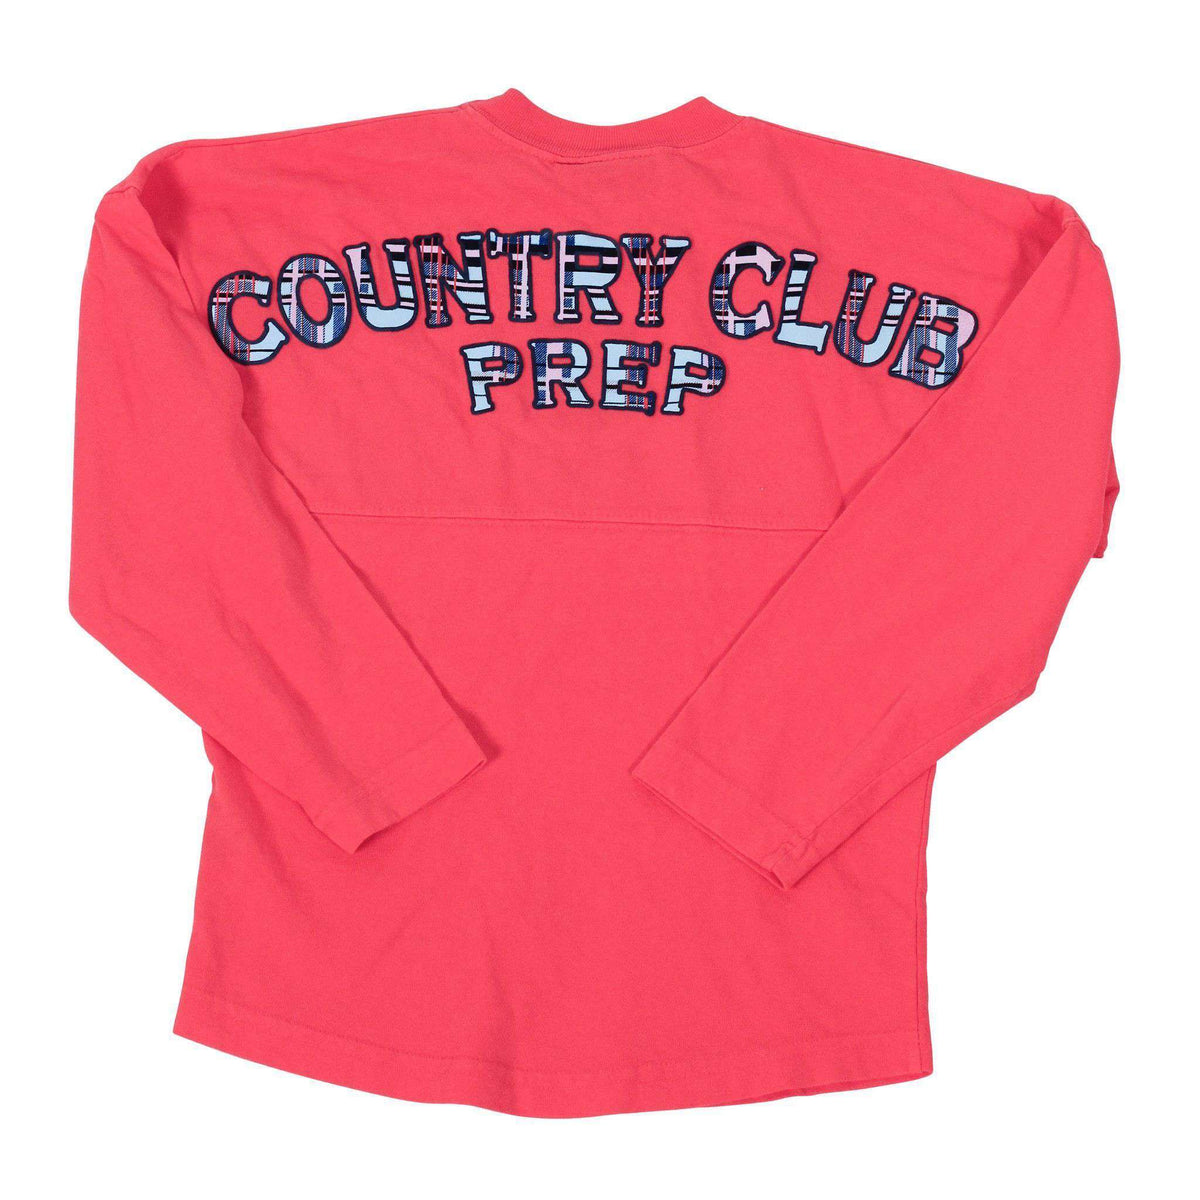 Childs Country Club Prep Jersey in Coral and Madras by Spirit Jersey - Country Club Prep